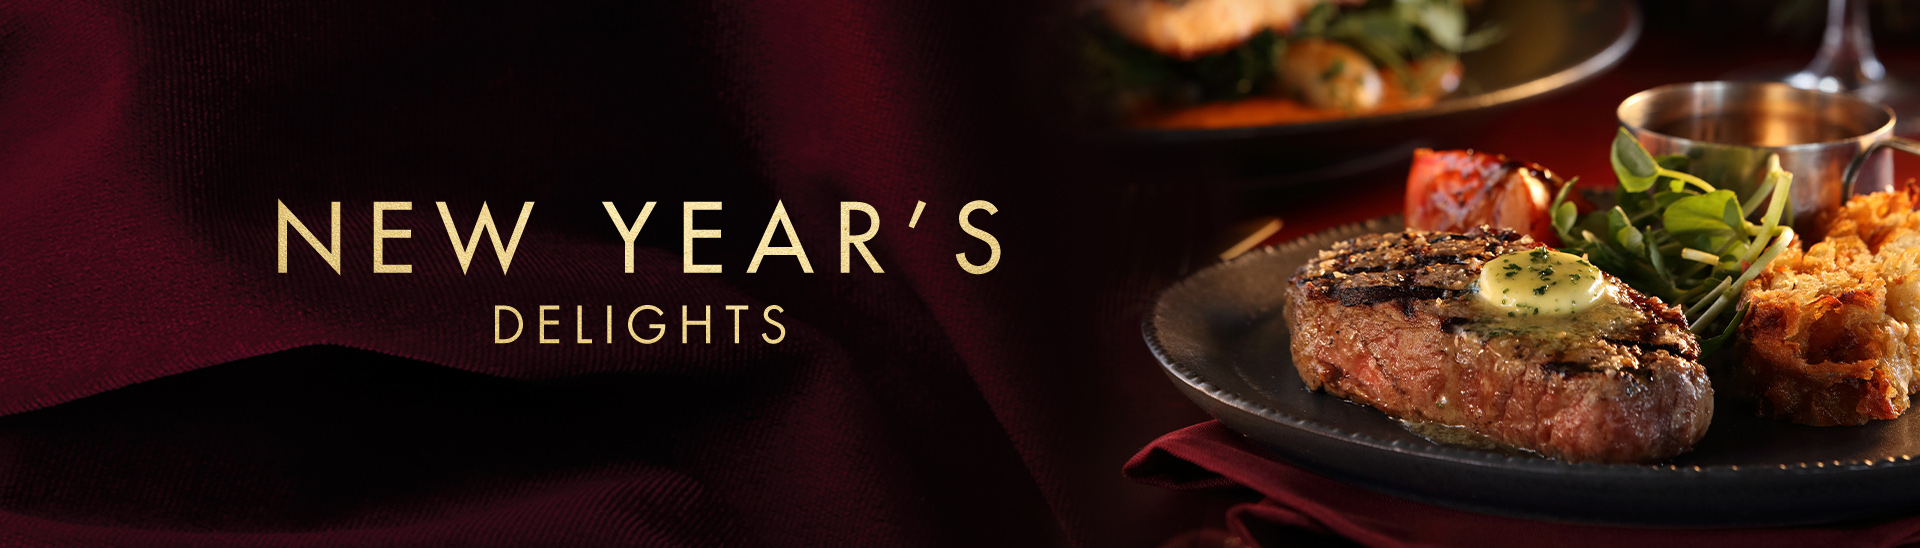 New Year’s Eve 2019 at Miller & Carter Cardiff Bay